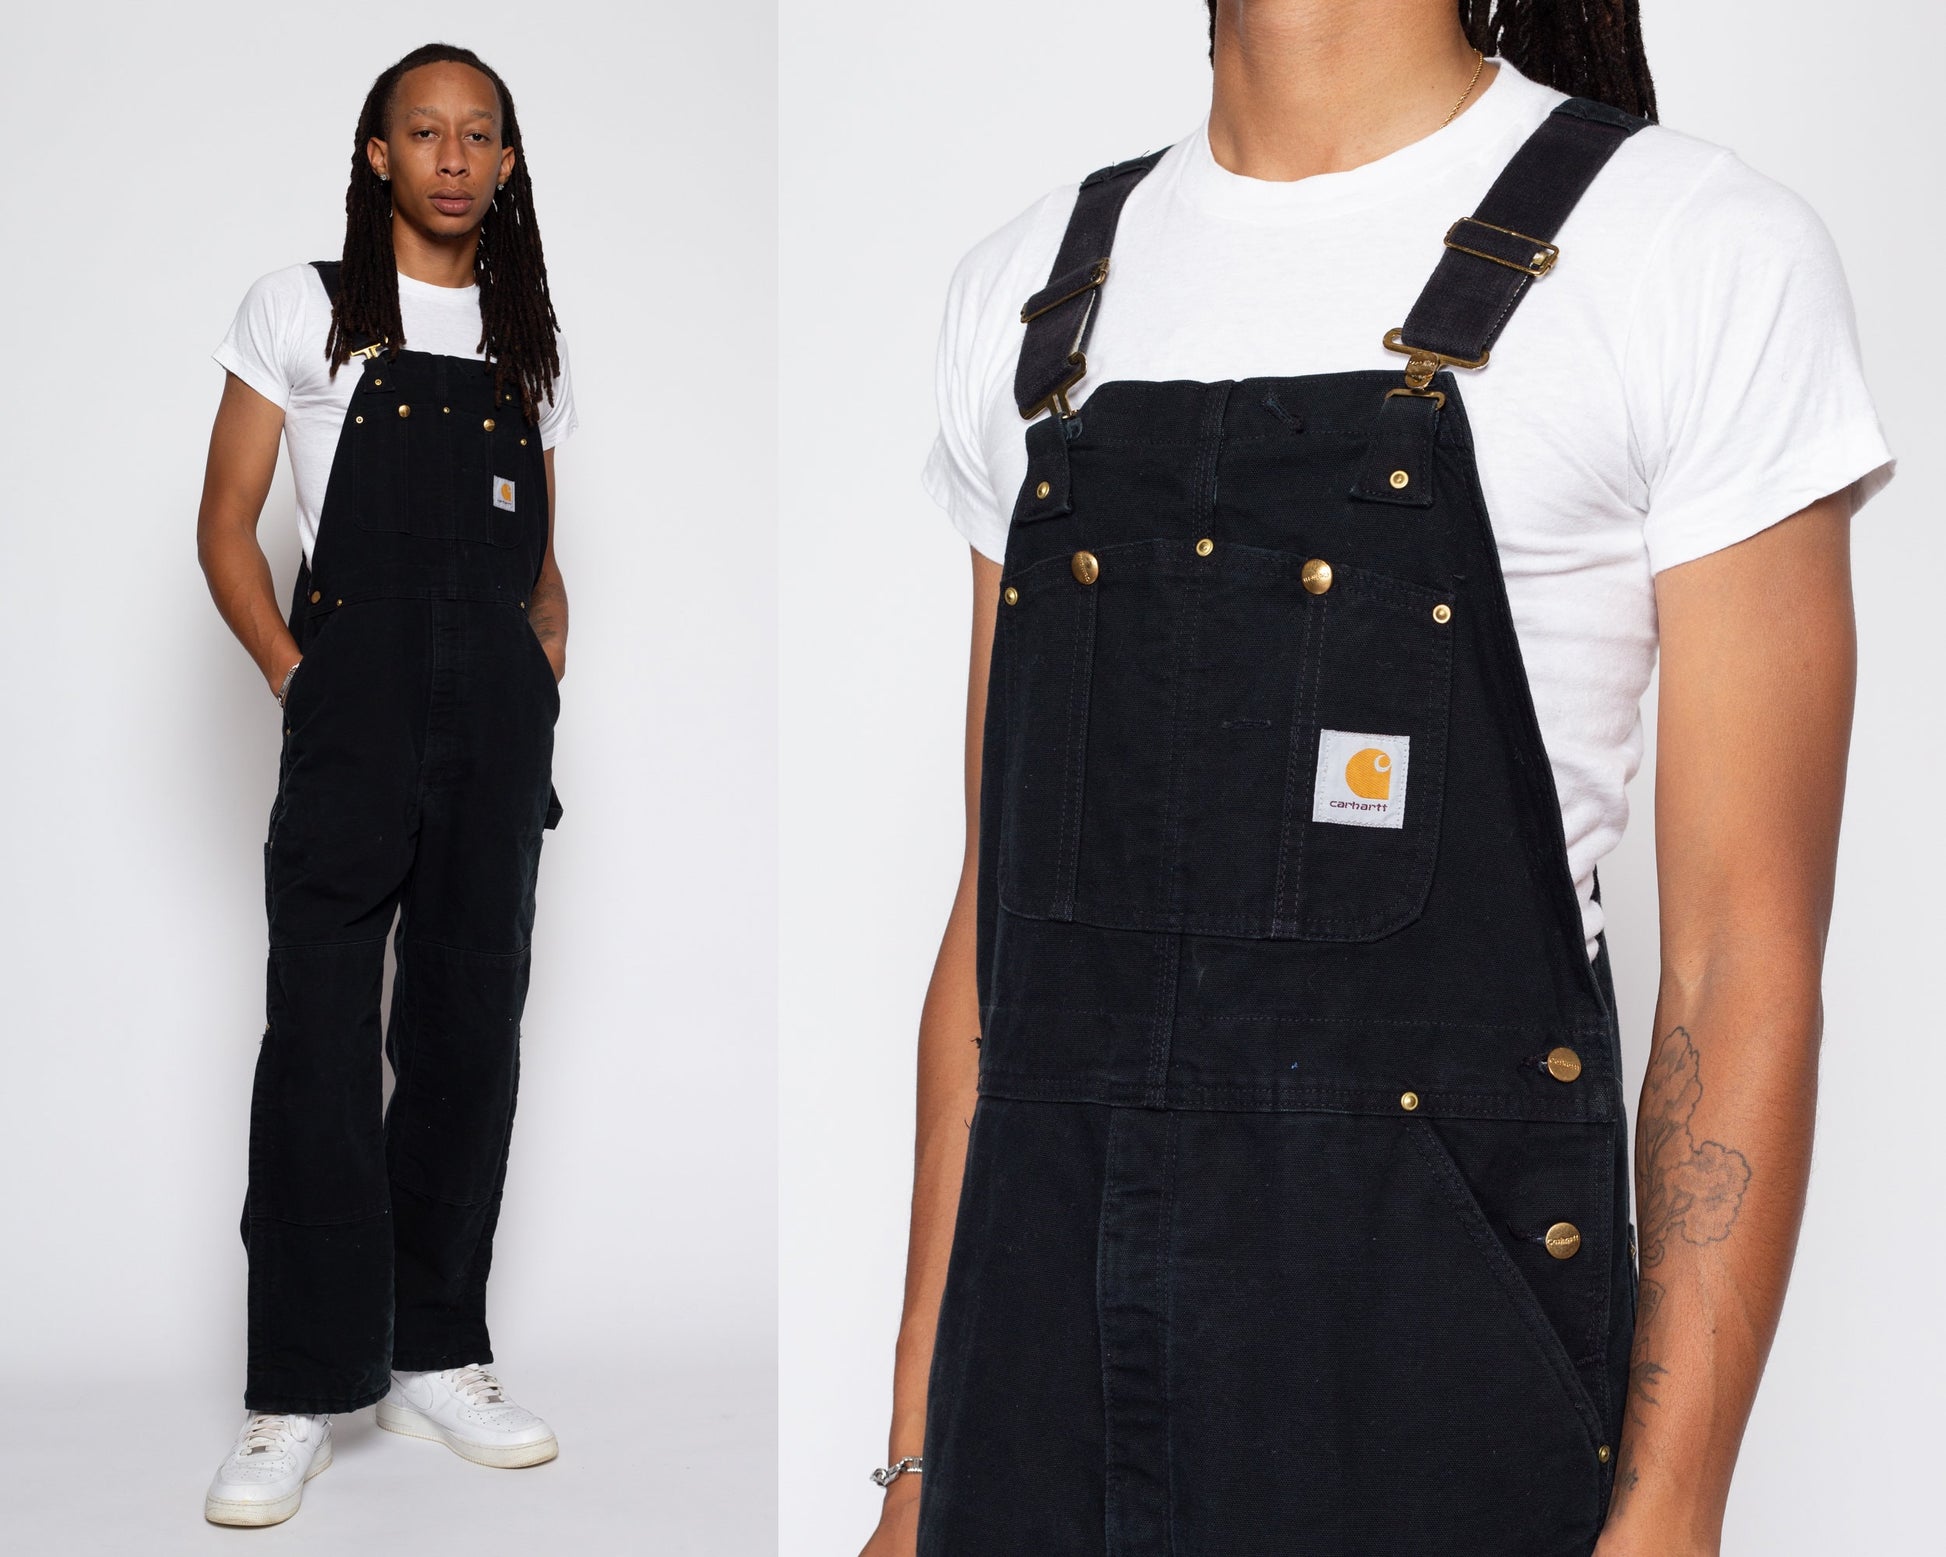 Carhartt Men's 38 in. x 34 in. Black Cotton Midweight Bib Overalls R41-BLK  - The Home Depot